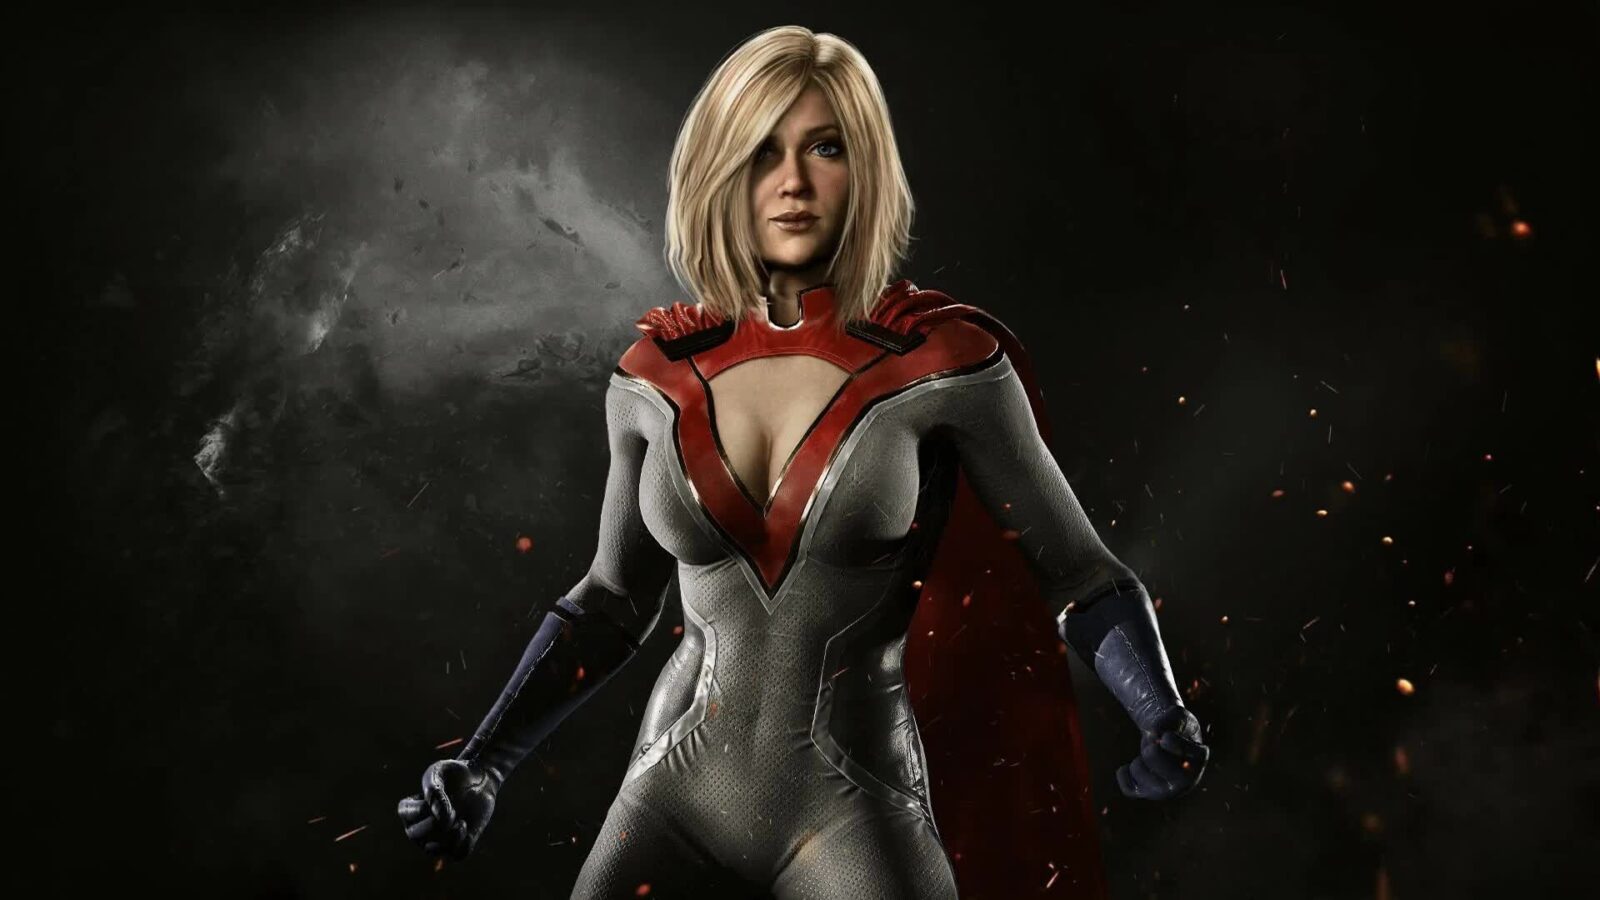 Power Girl Injustice 2 Game – Free Live Wallpaper